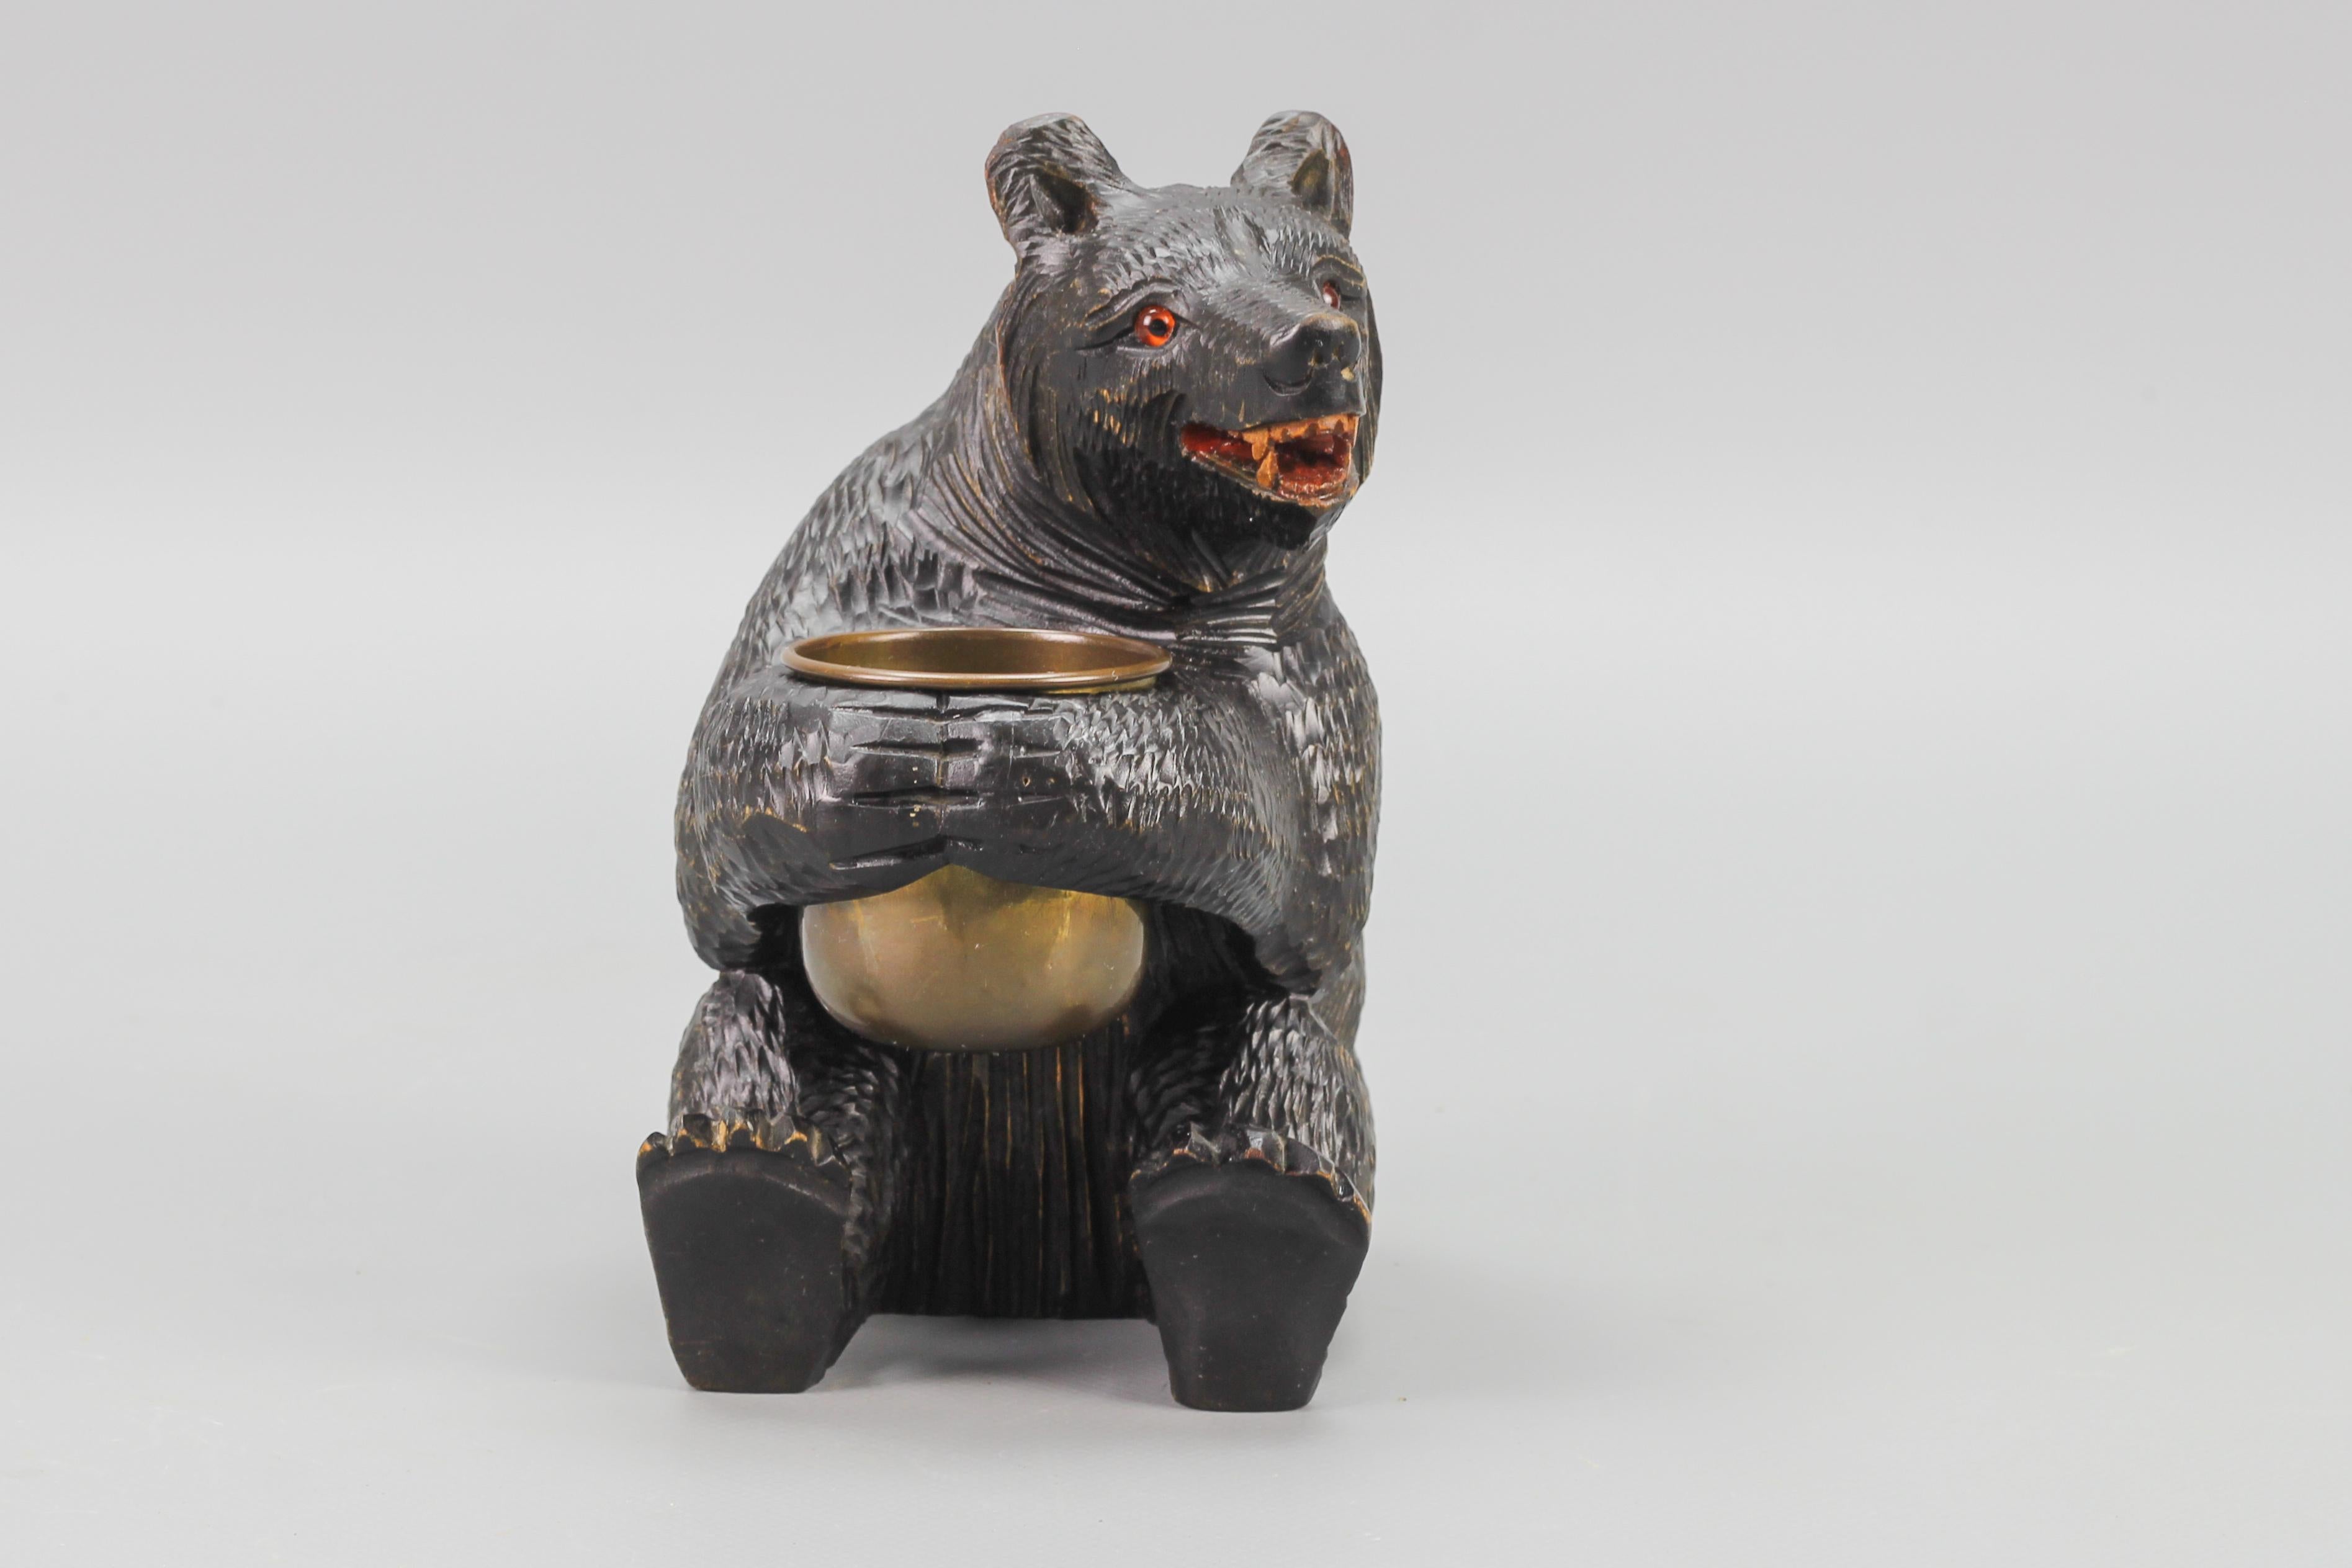 Hand-carved black Forest style bear with a copper pot, from the circa 1920s.
This beautiful hand-carved wooden seated bear is holding a copper pot. Nicely detailed, with glass eyes.
Can be used for the storage of small items on a desk.
Dimensions: